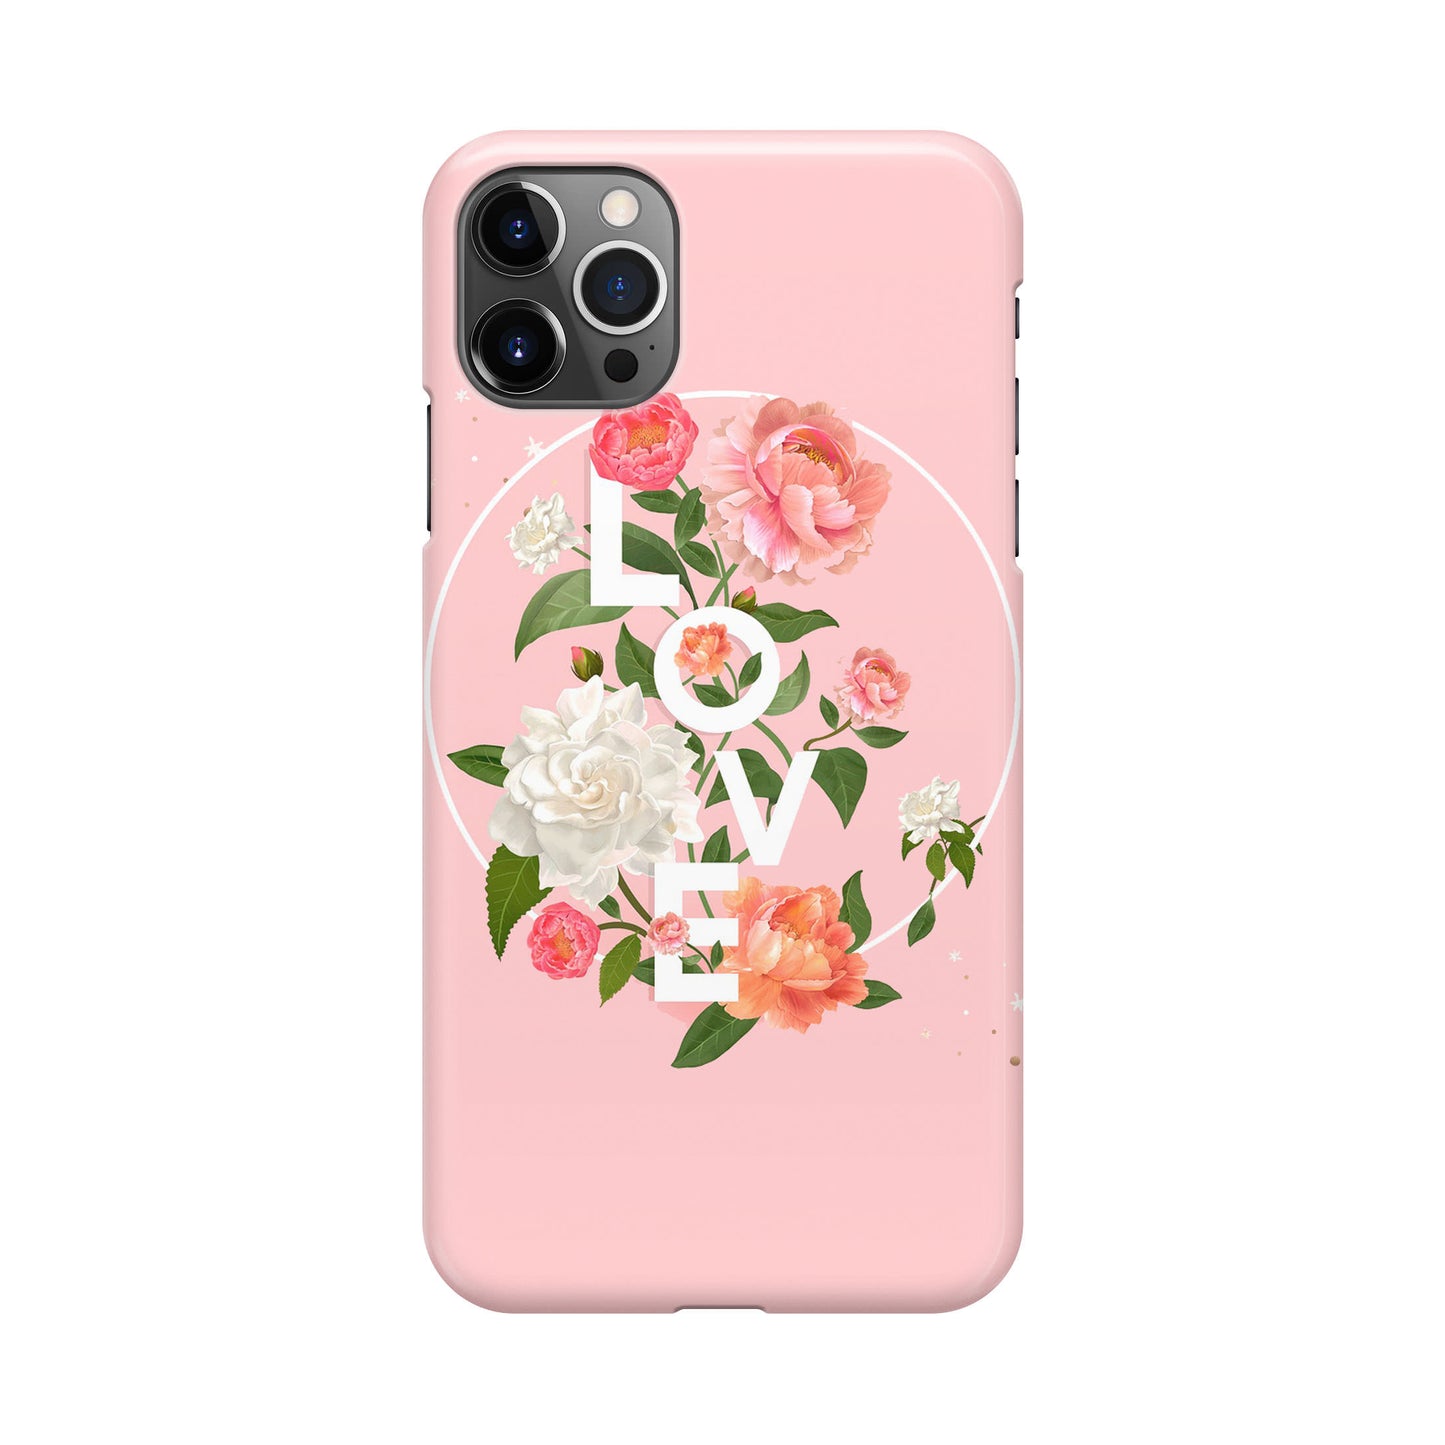 The Word Love iPhone 12 Pro Max Case